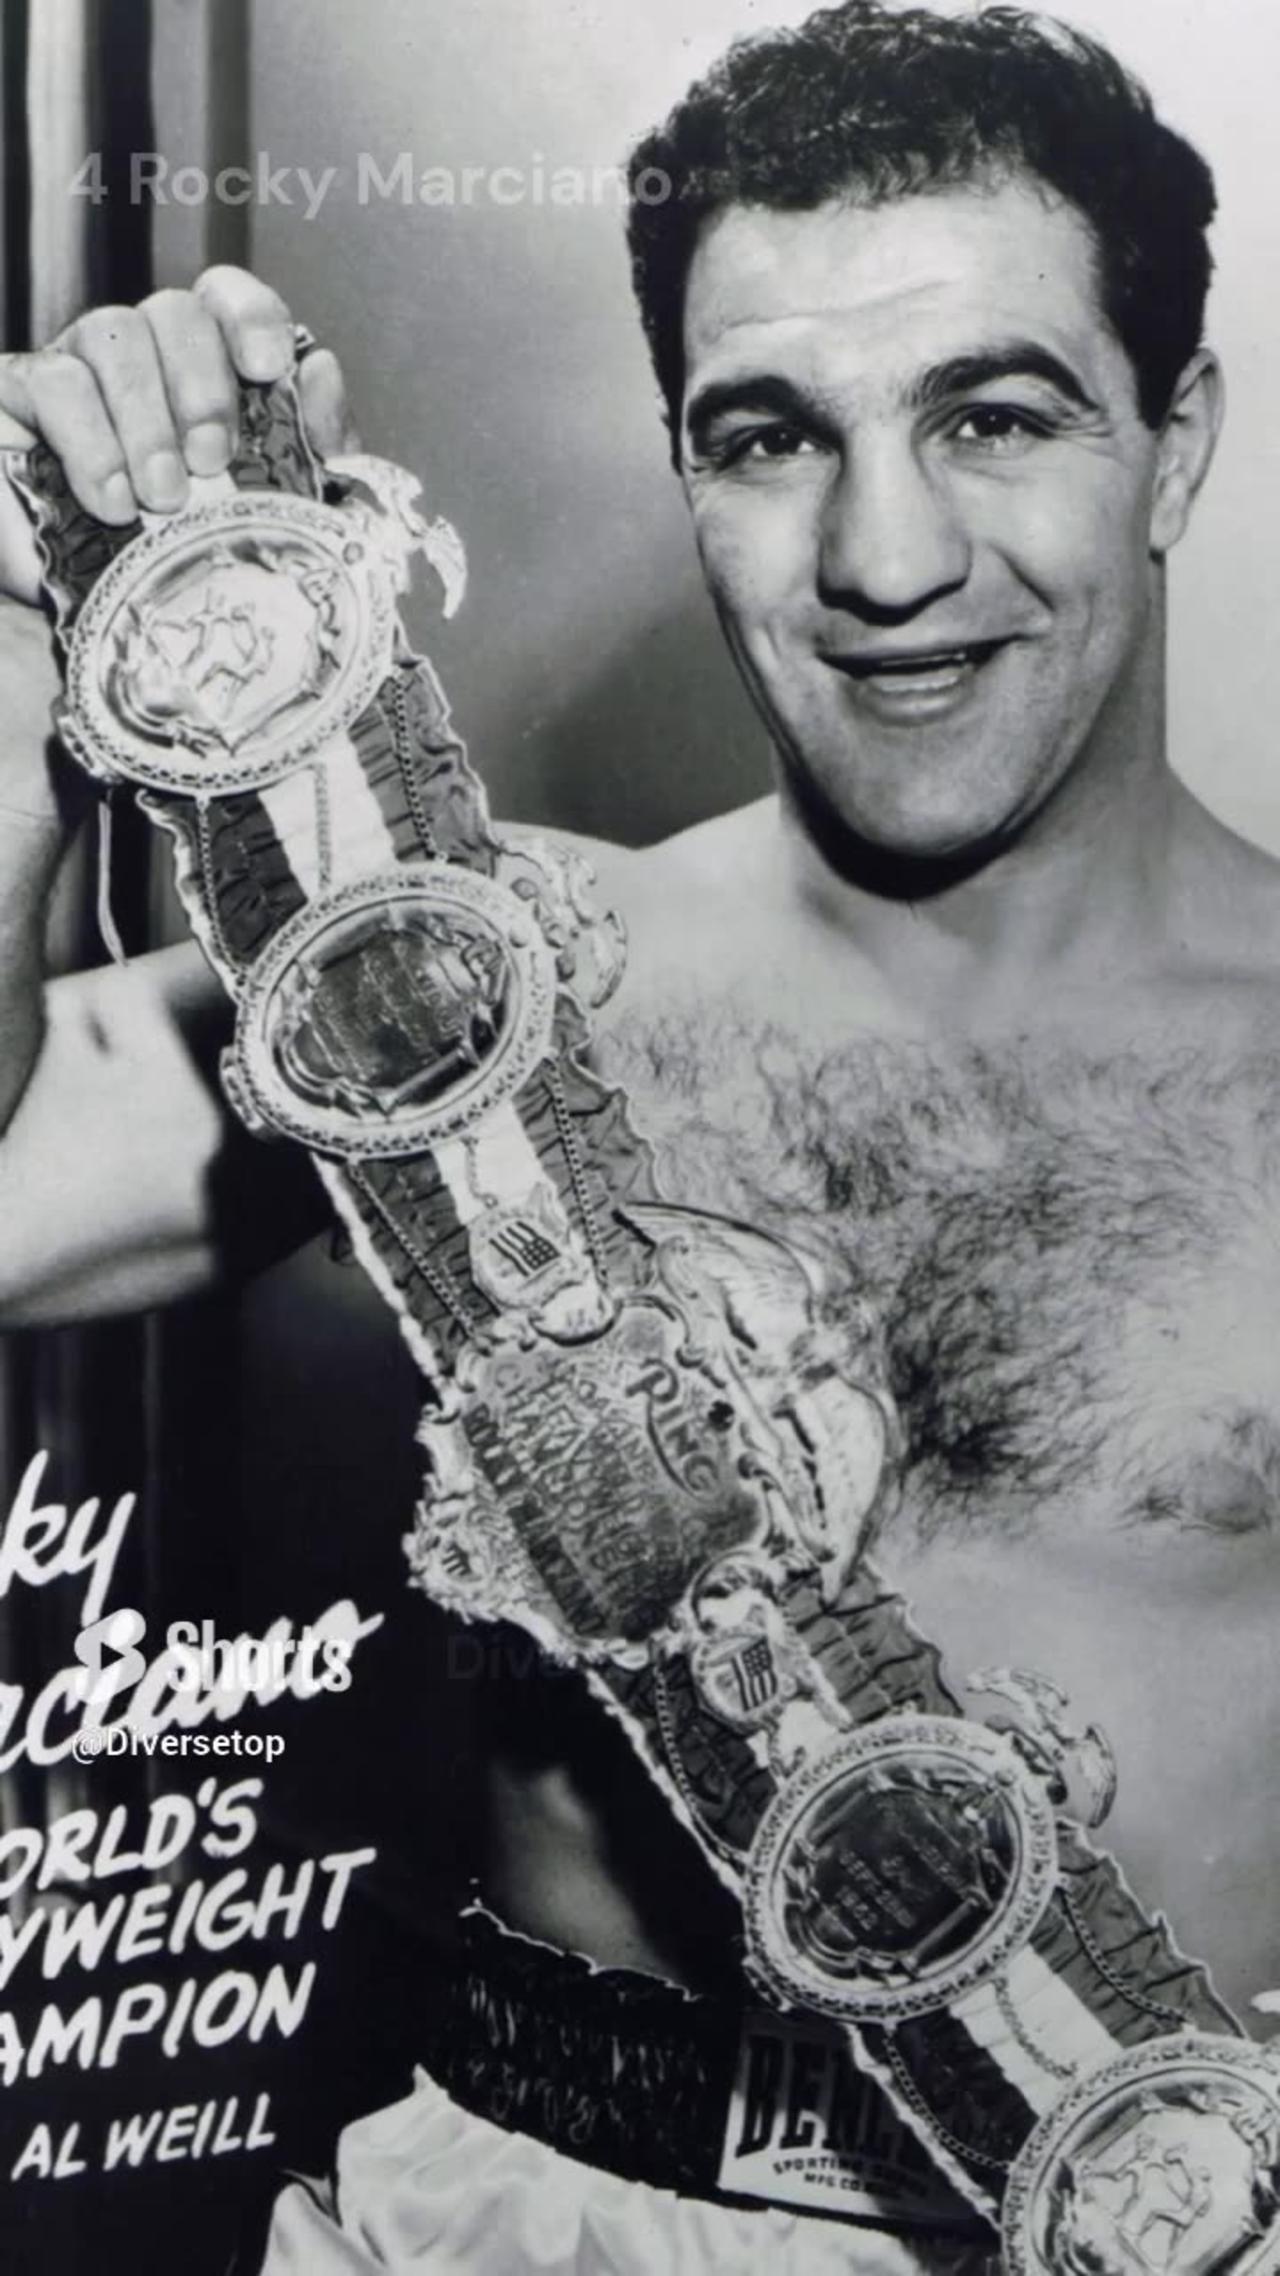 (4) Rocky Marciano #top5 #boxing #sports #top #mohammedali #tyson #mayweather #sport